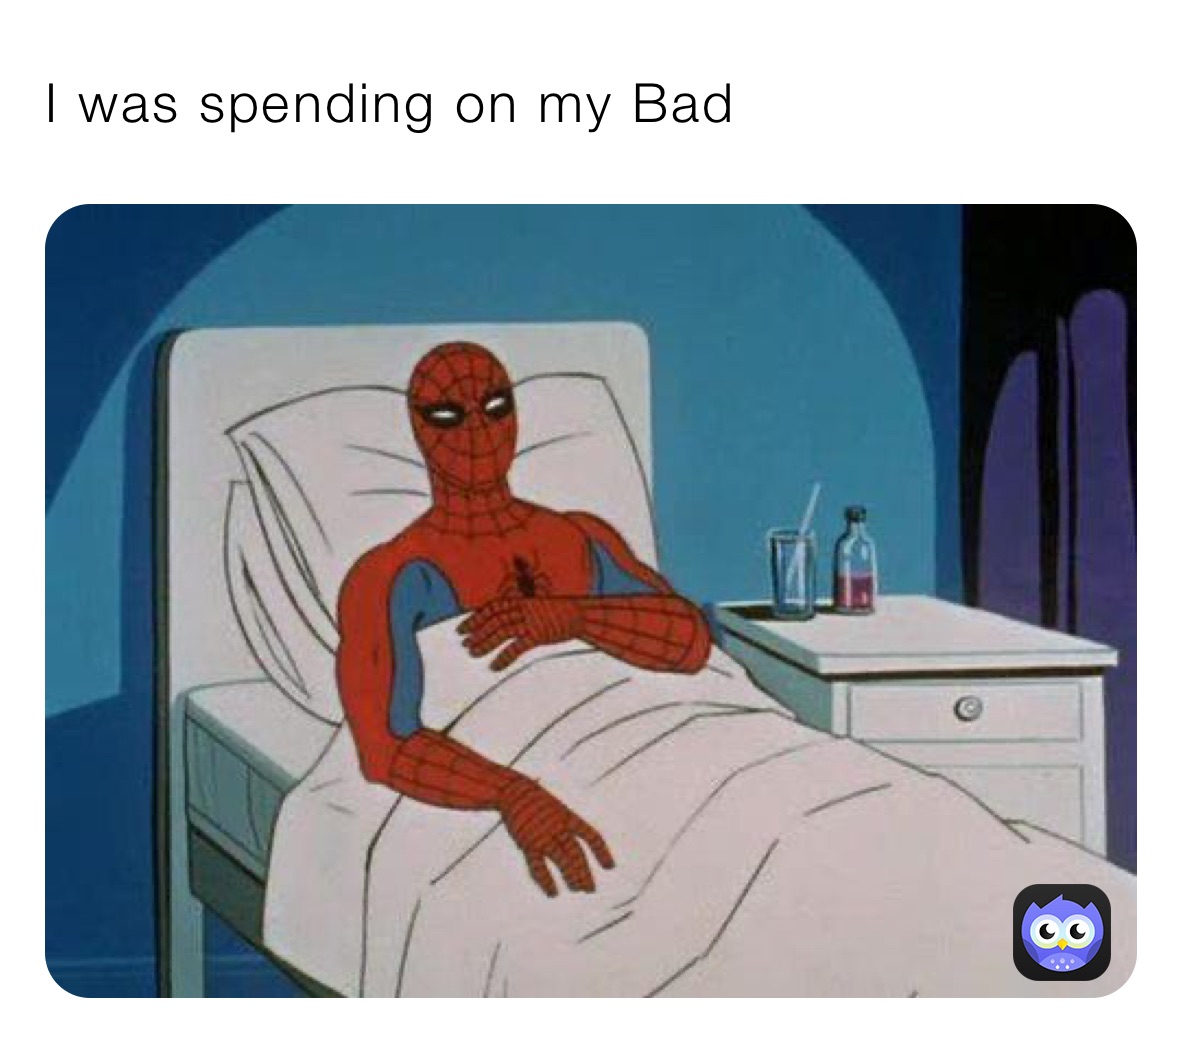 I was spending on my Bad